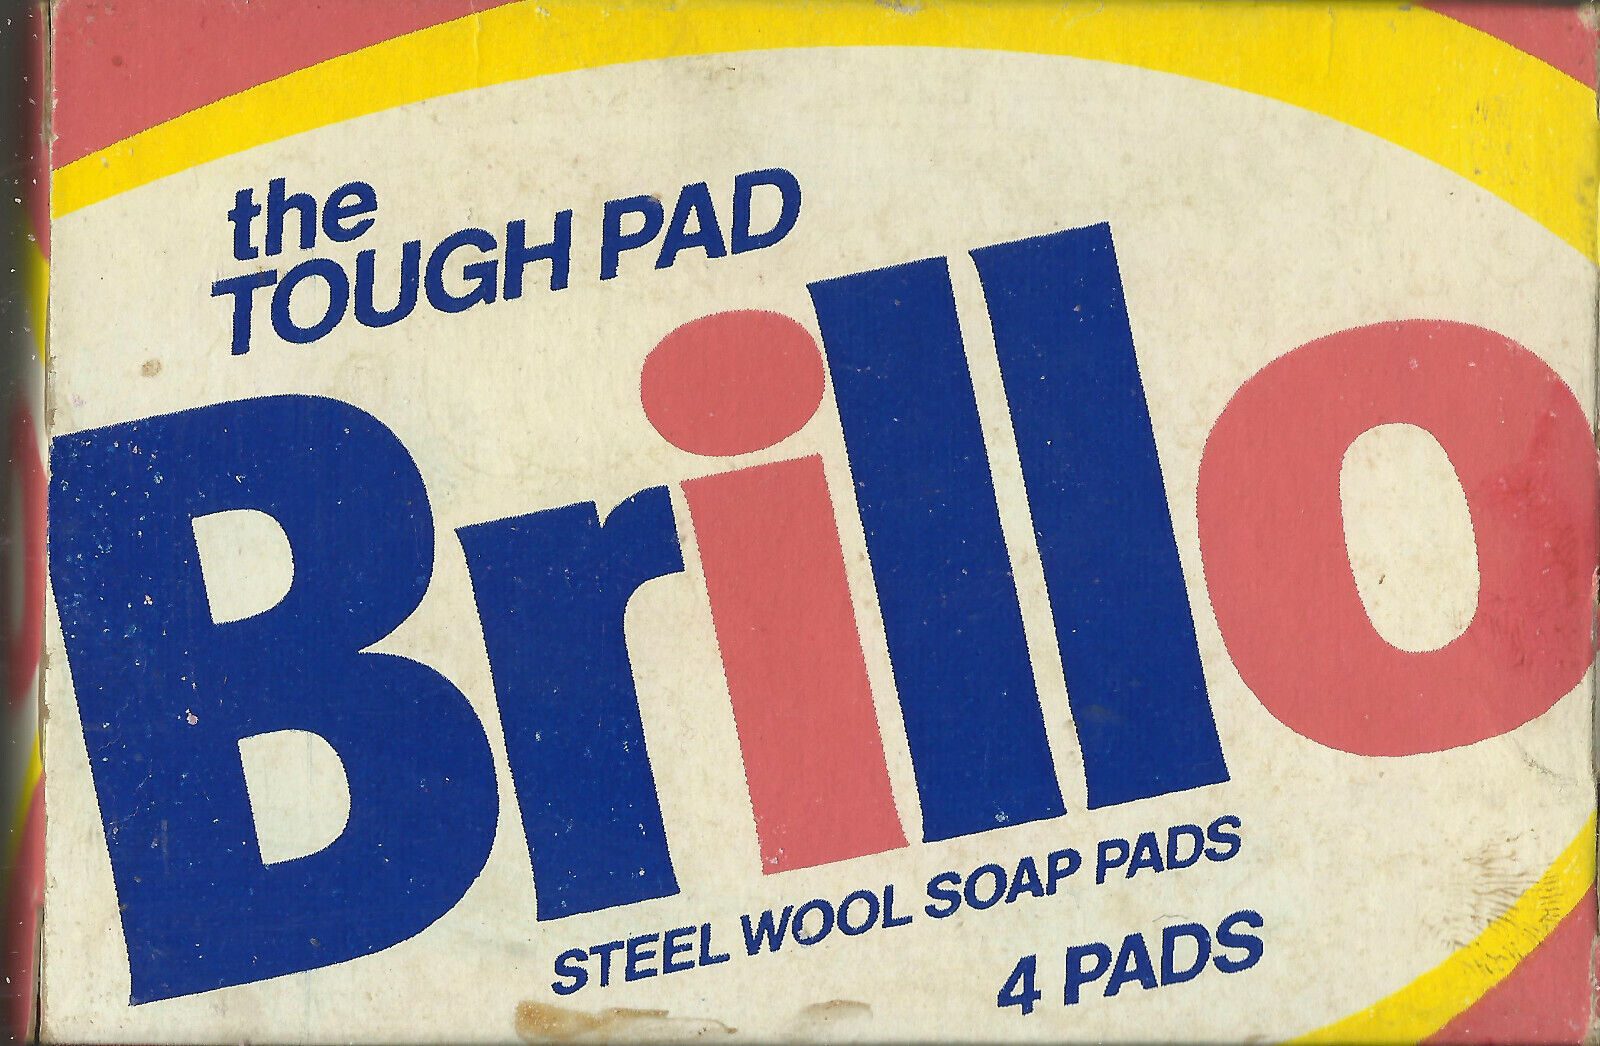 Vintage 90s Box of 4 Brillo Steel Wool Soap Pads Dial Corporation